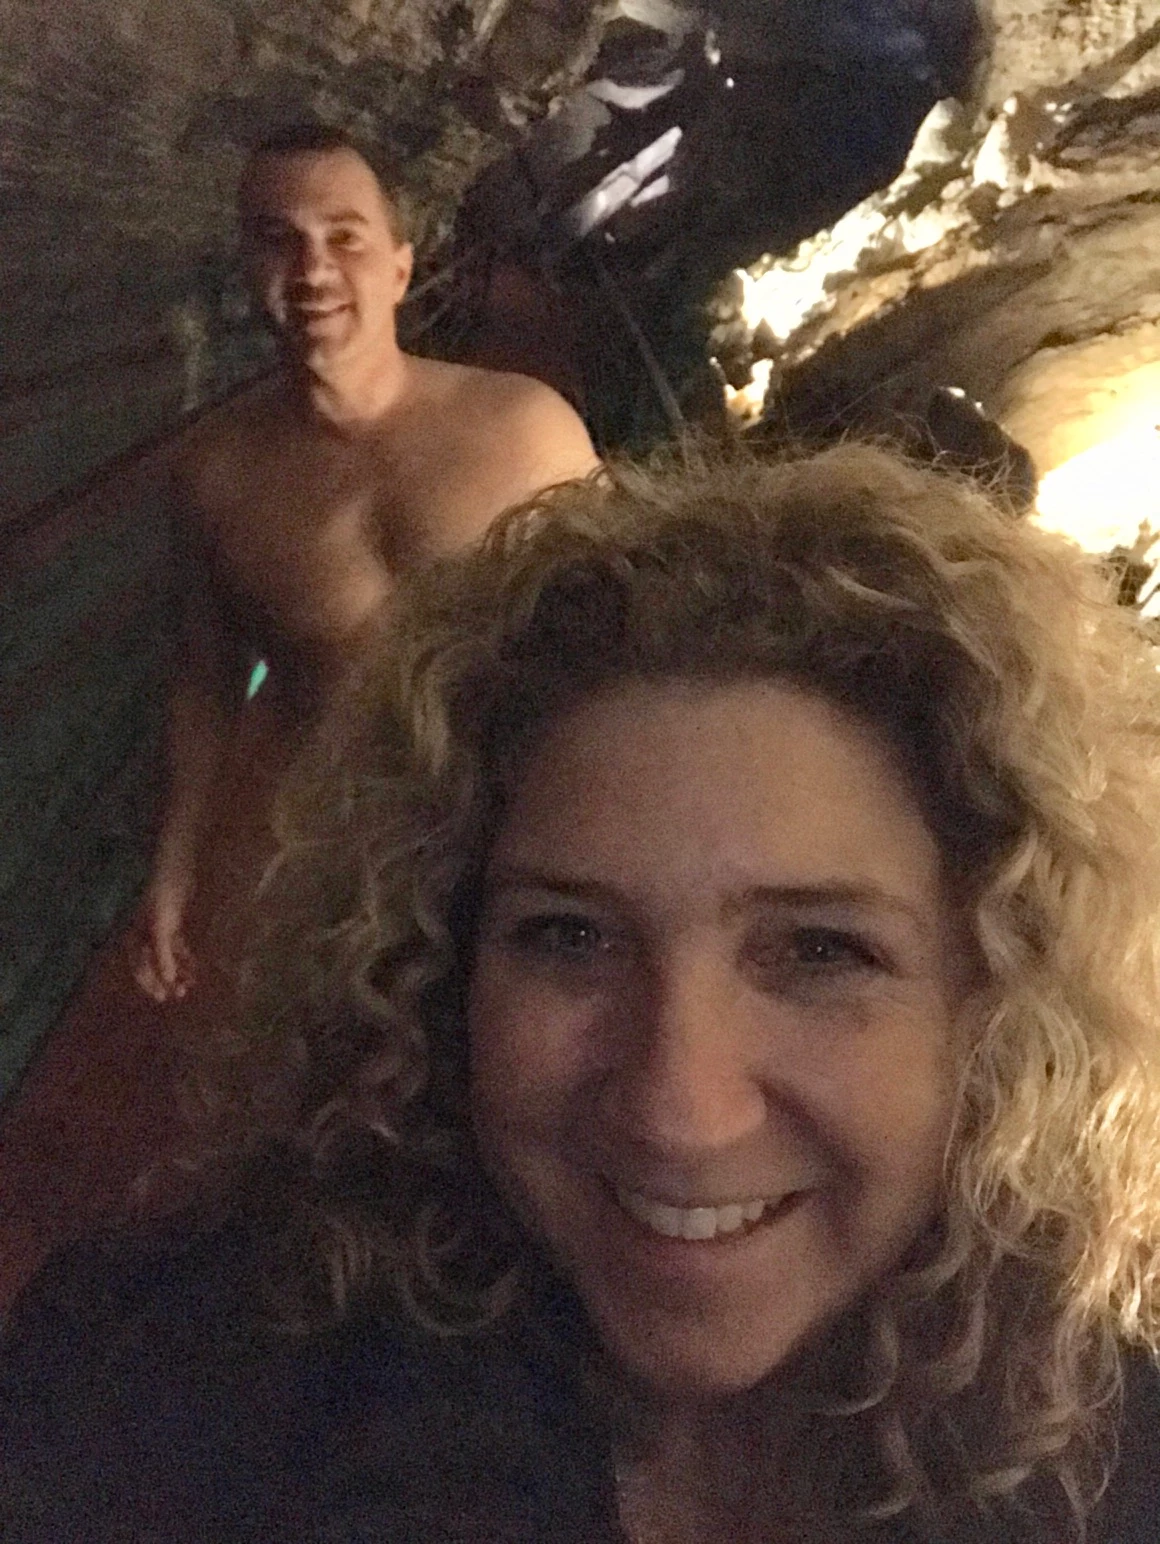 Howe Caverns Rd Annual Naked In A Cave Announced